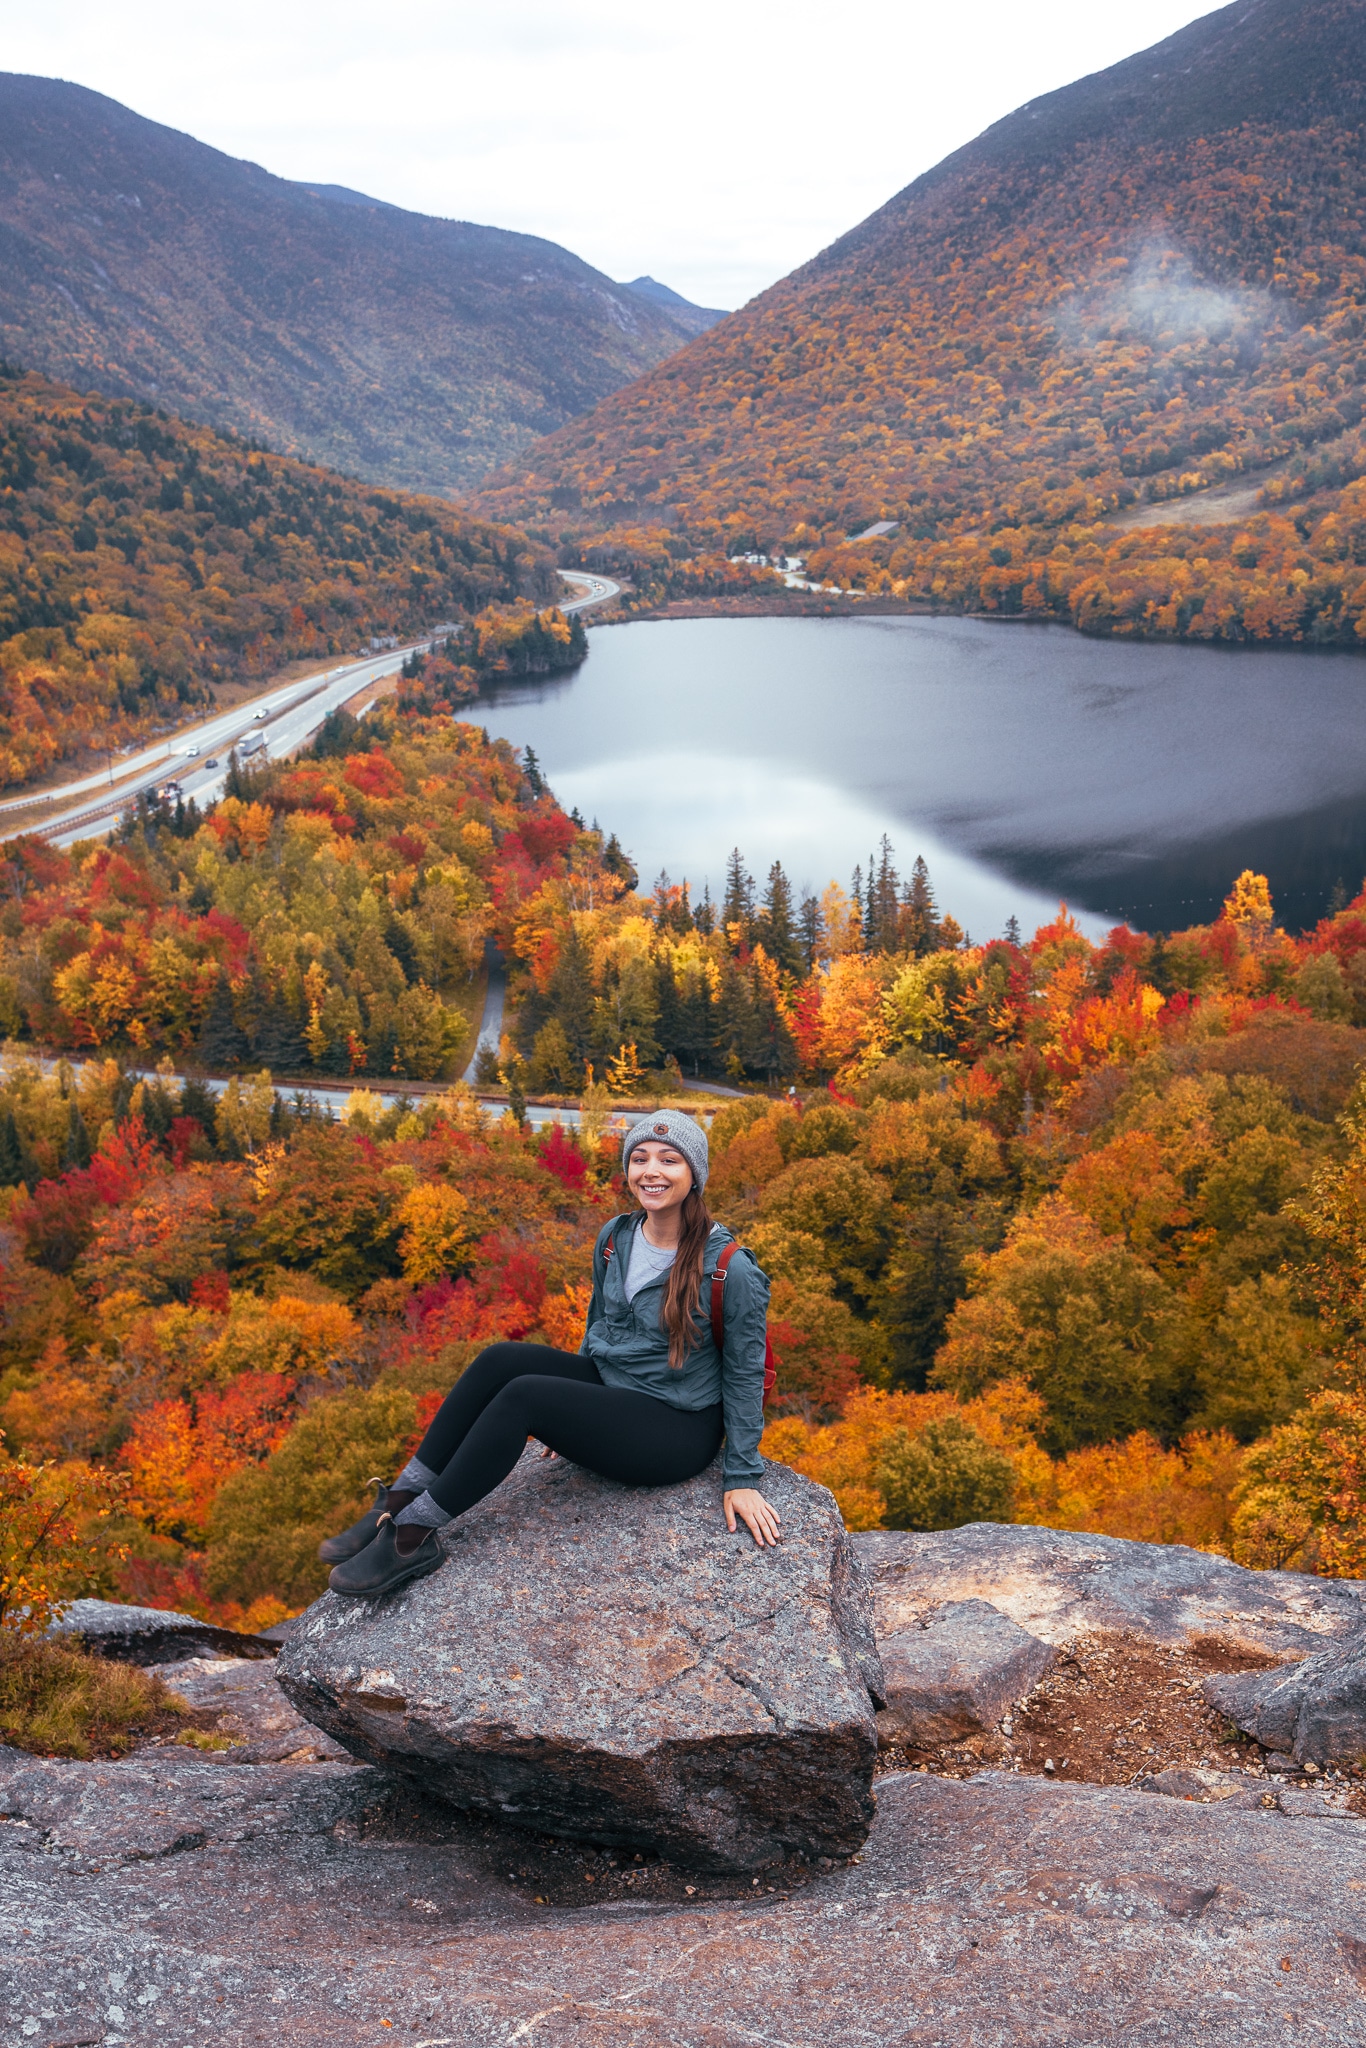 Hiking in New Hampshire in the fall